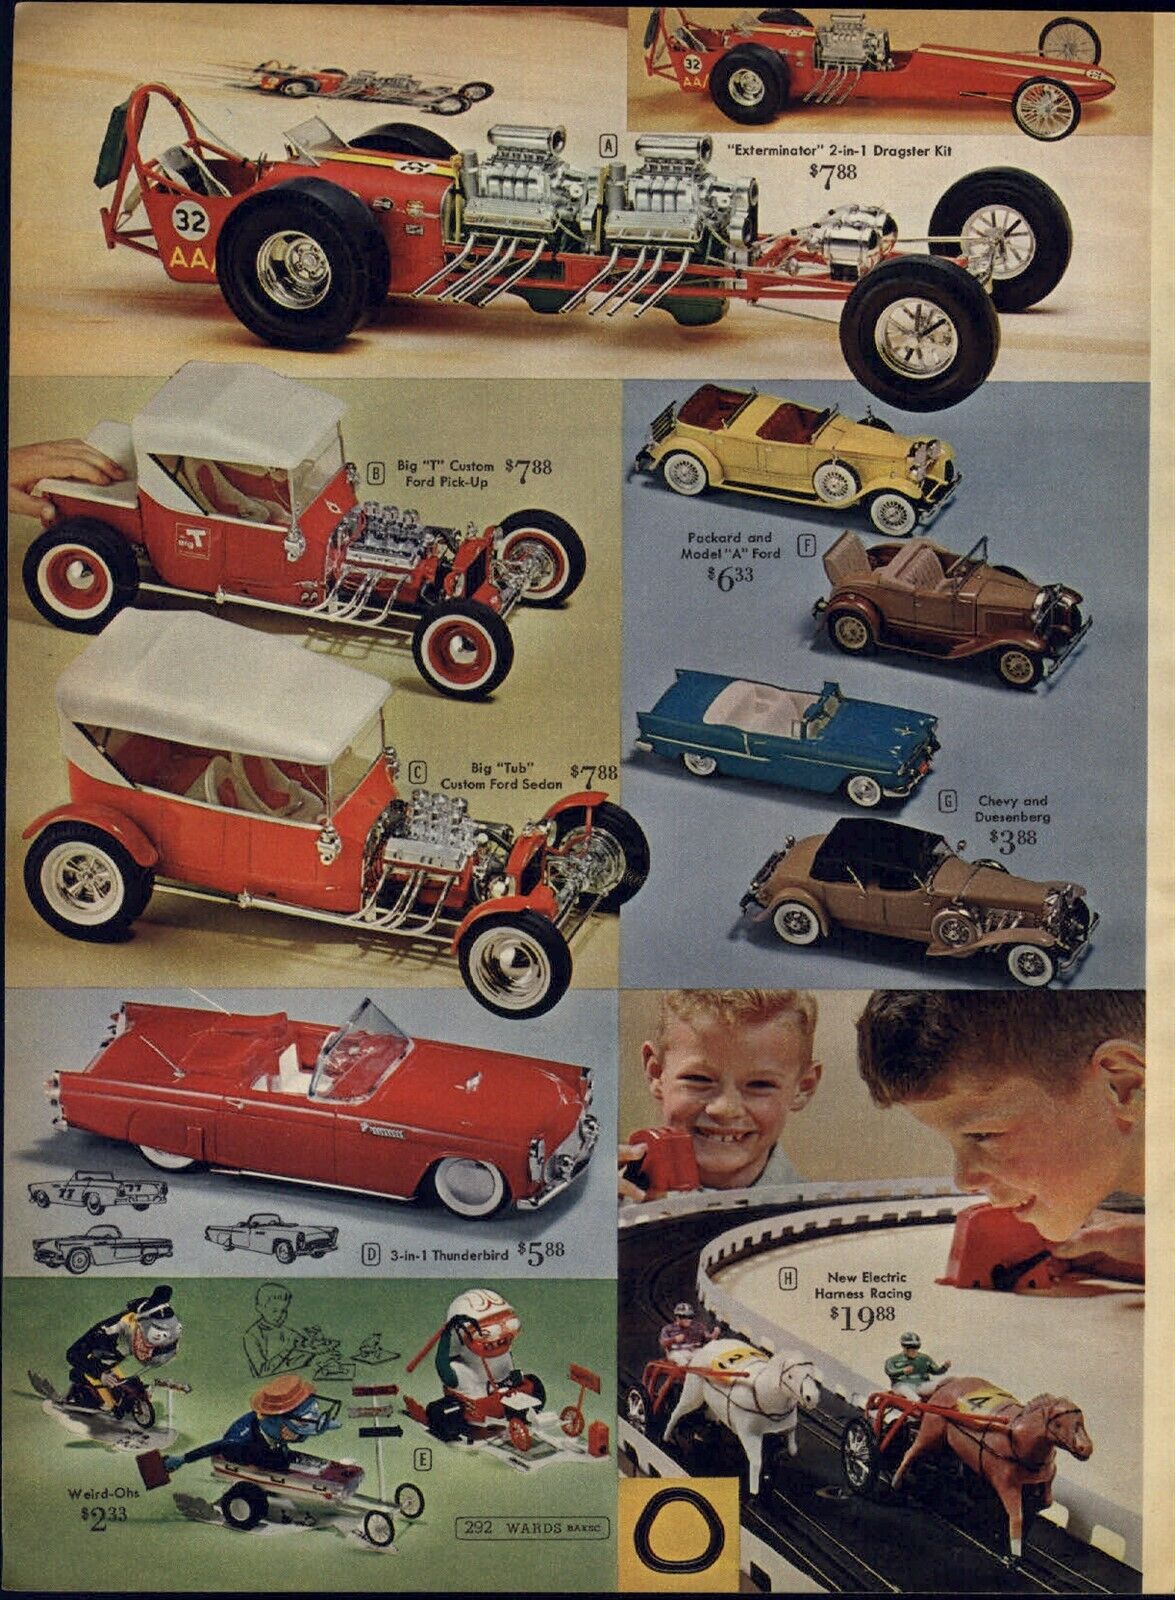 1964 PAPER AD 2 PG COLOR Exterminator Dragster Big T Tub Ford Harness Racing Set